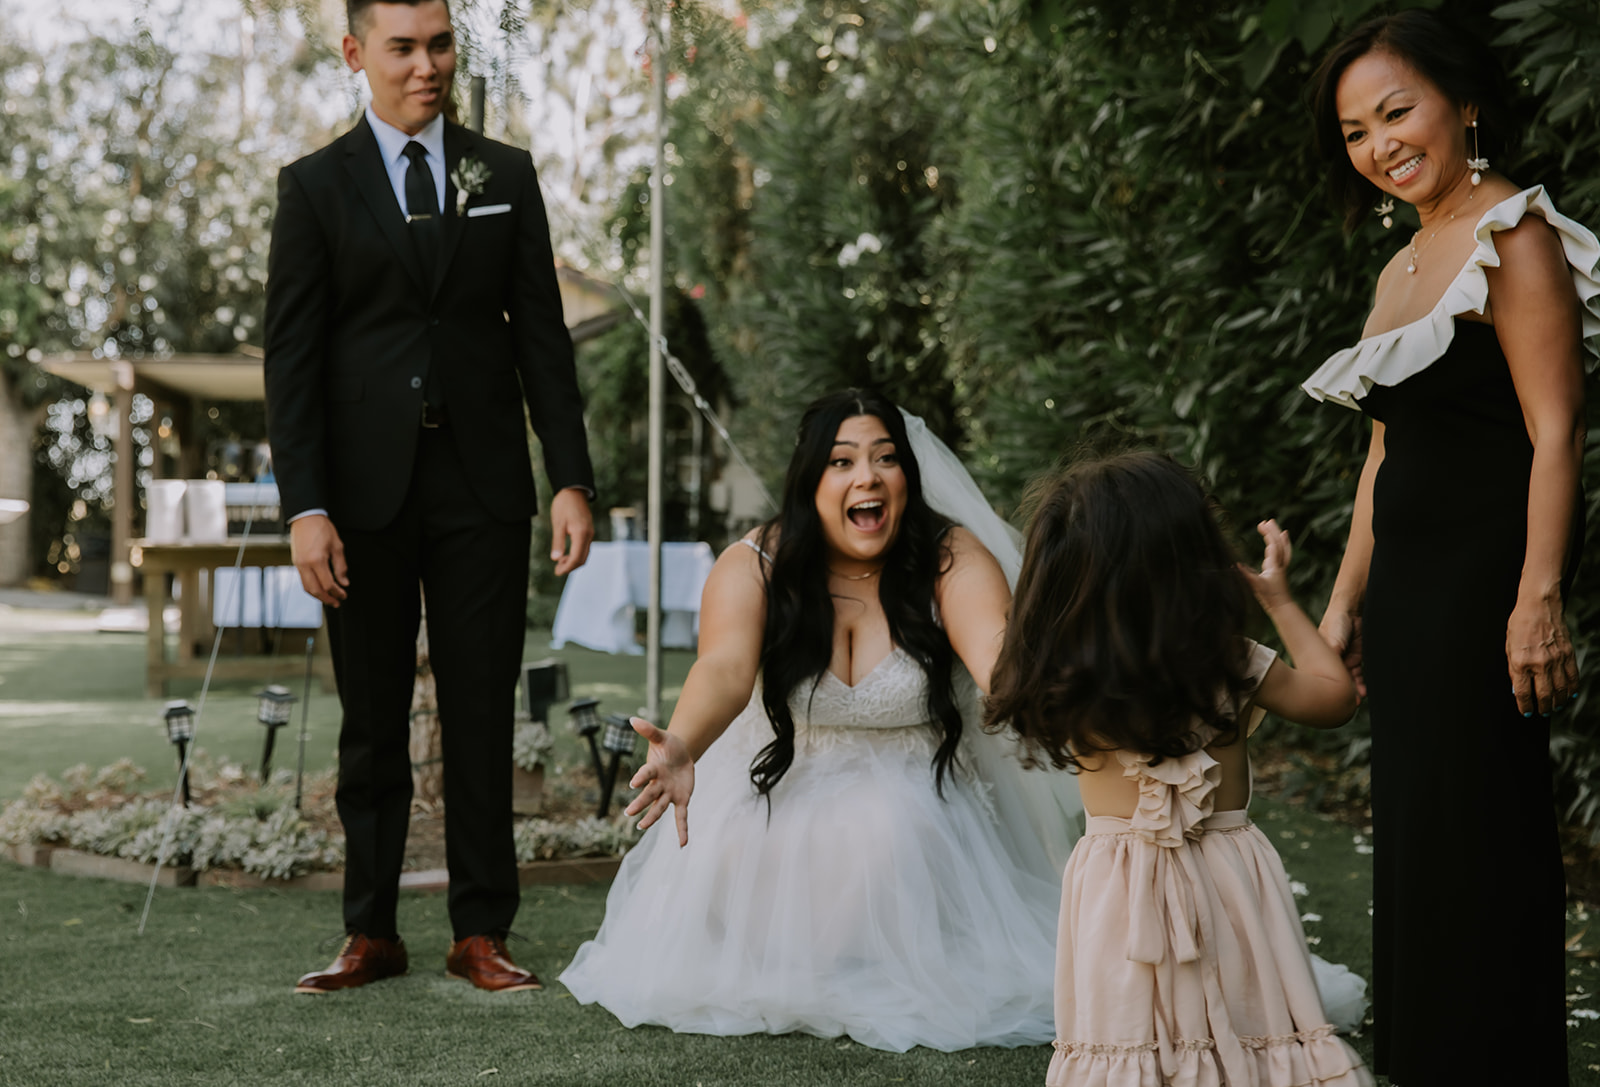 Bride crouched down looking at daughter